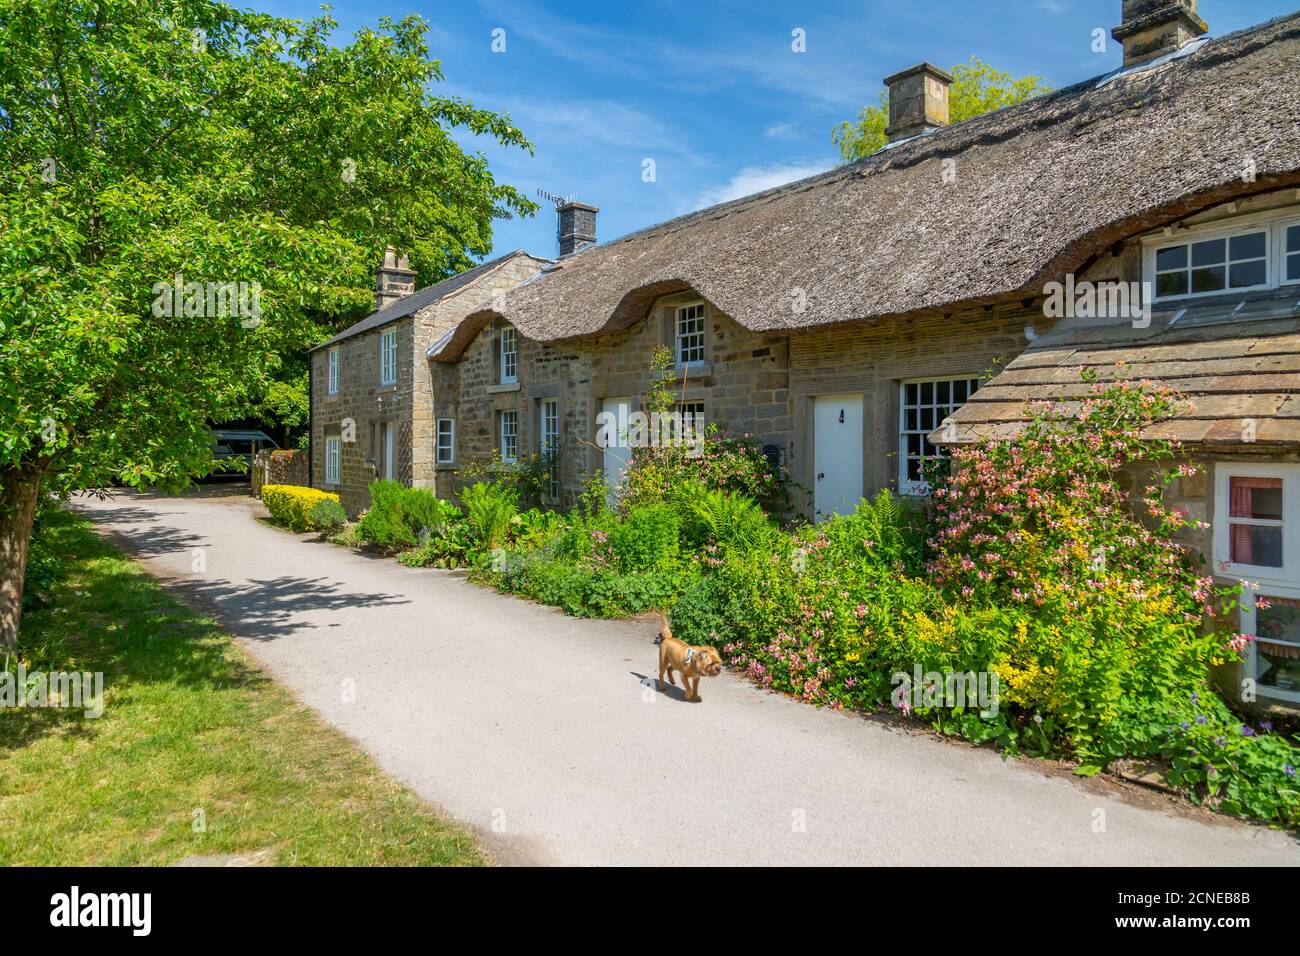 View of thatched cottages in Baslow, Derbyshire Dales, Derbyshire, England, United Kingdom, Europe Stock Photo